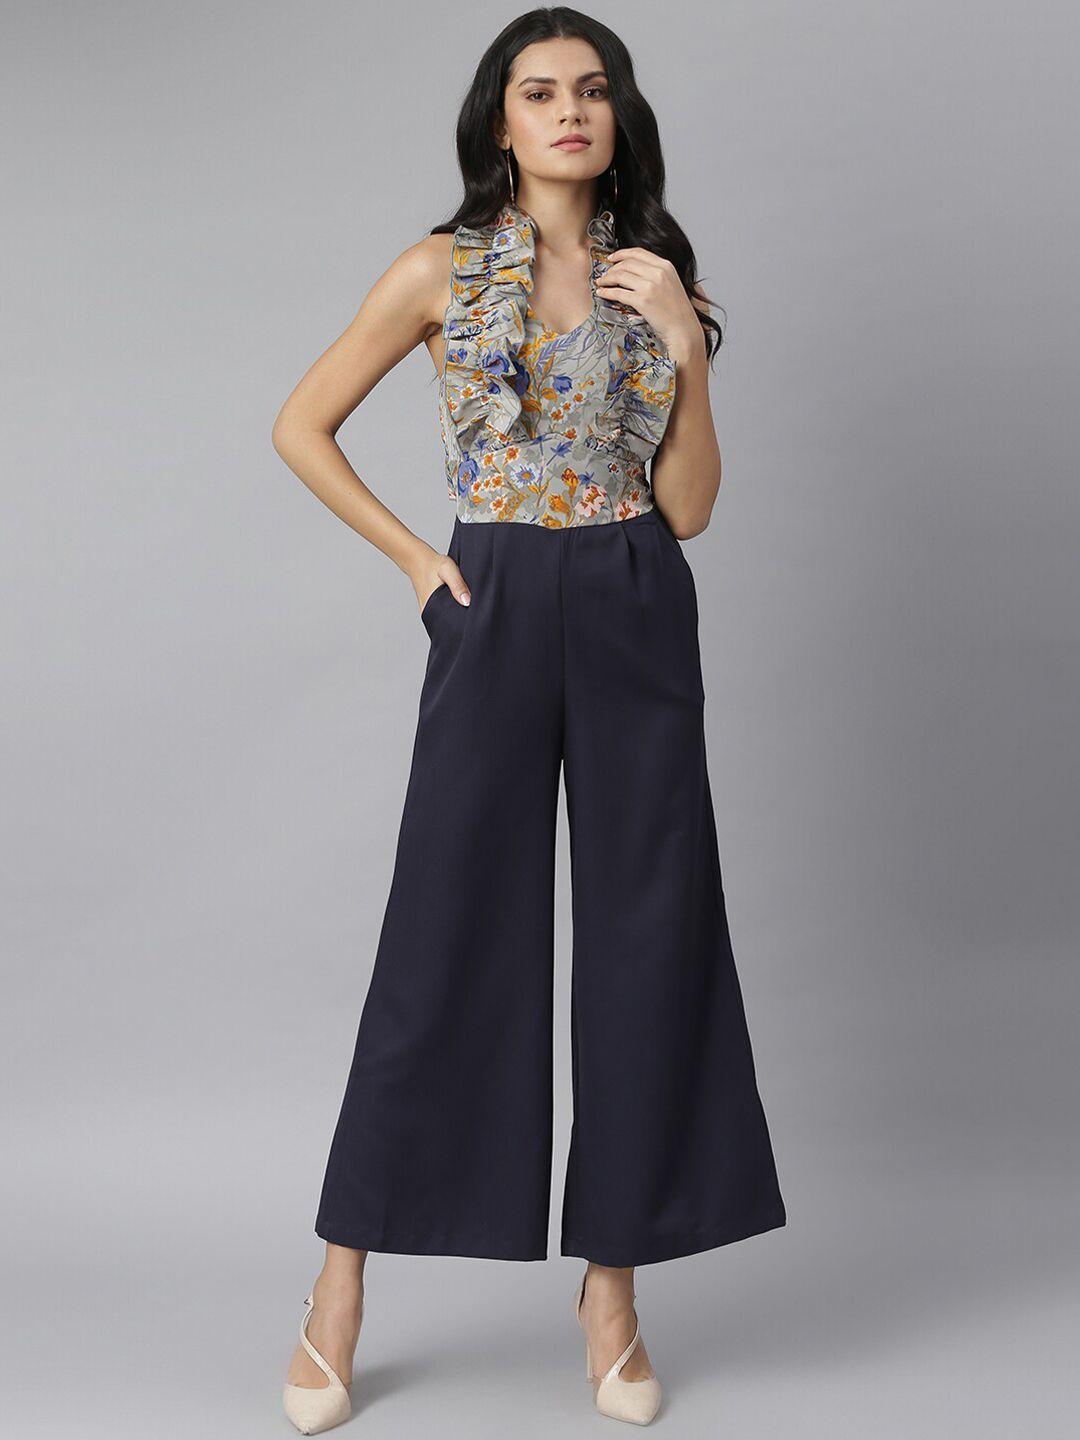 kassually grey & navy blue floral printed culotte jumpsuit with ruffles